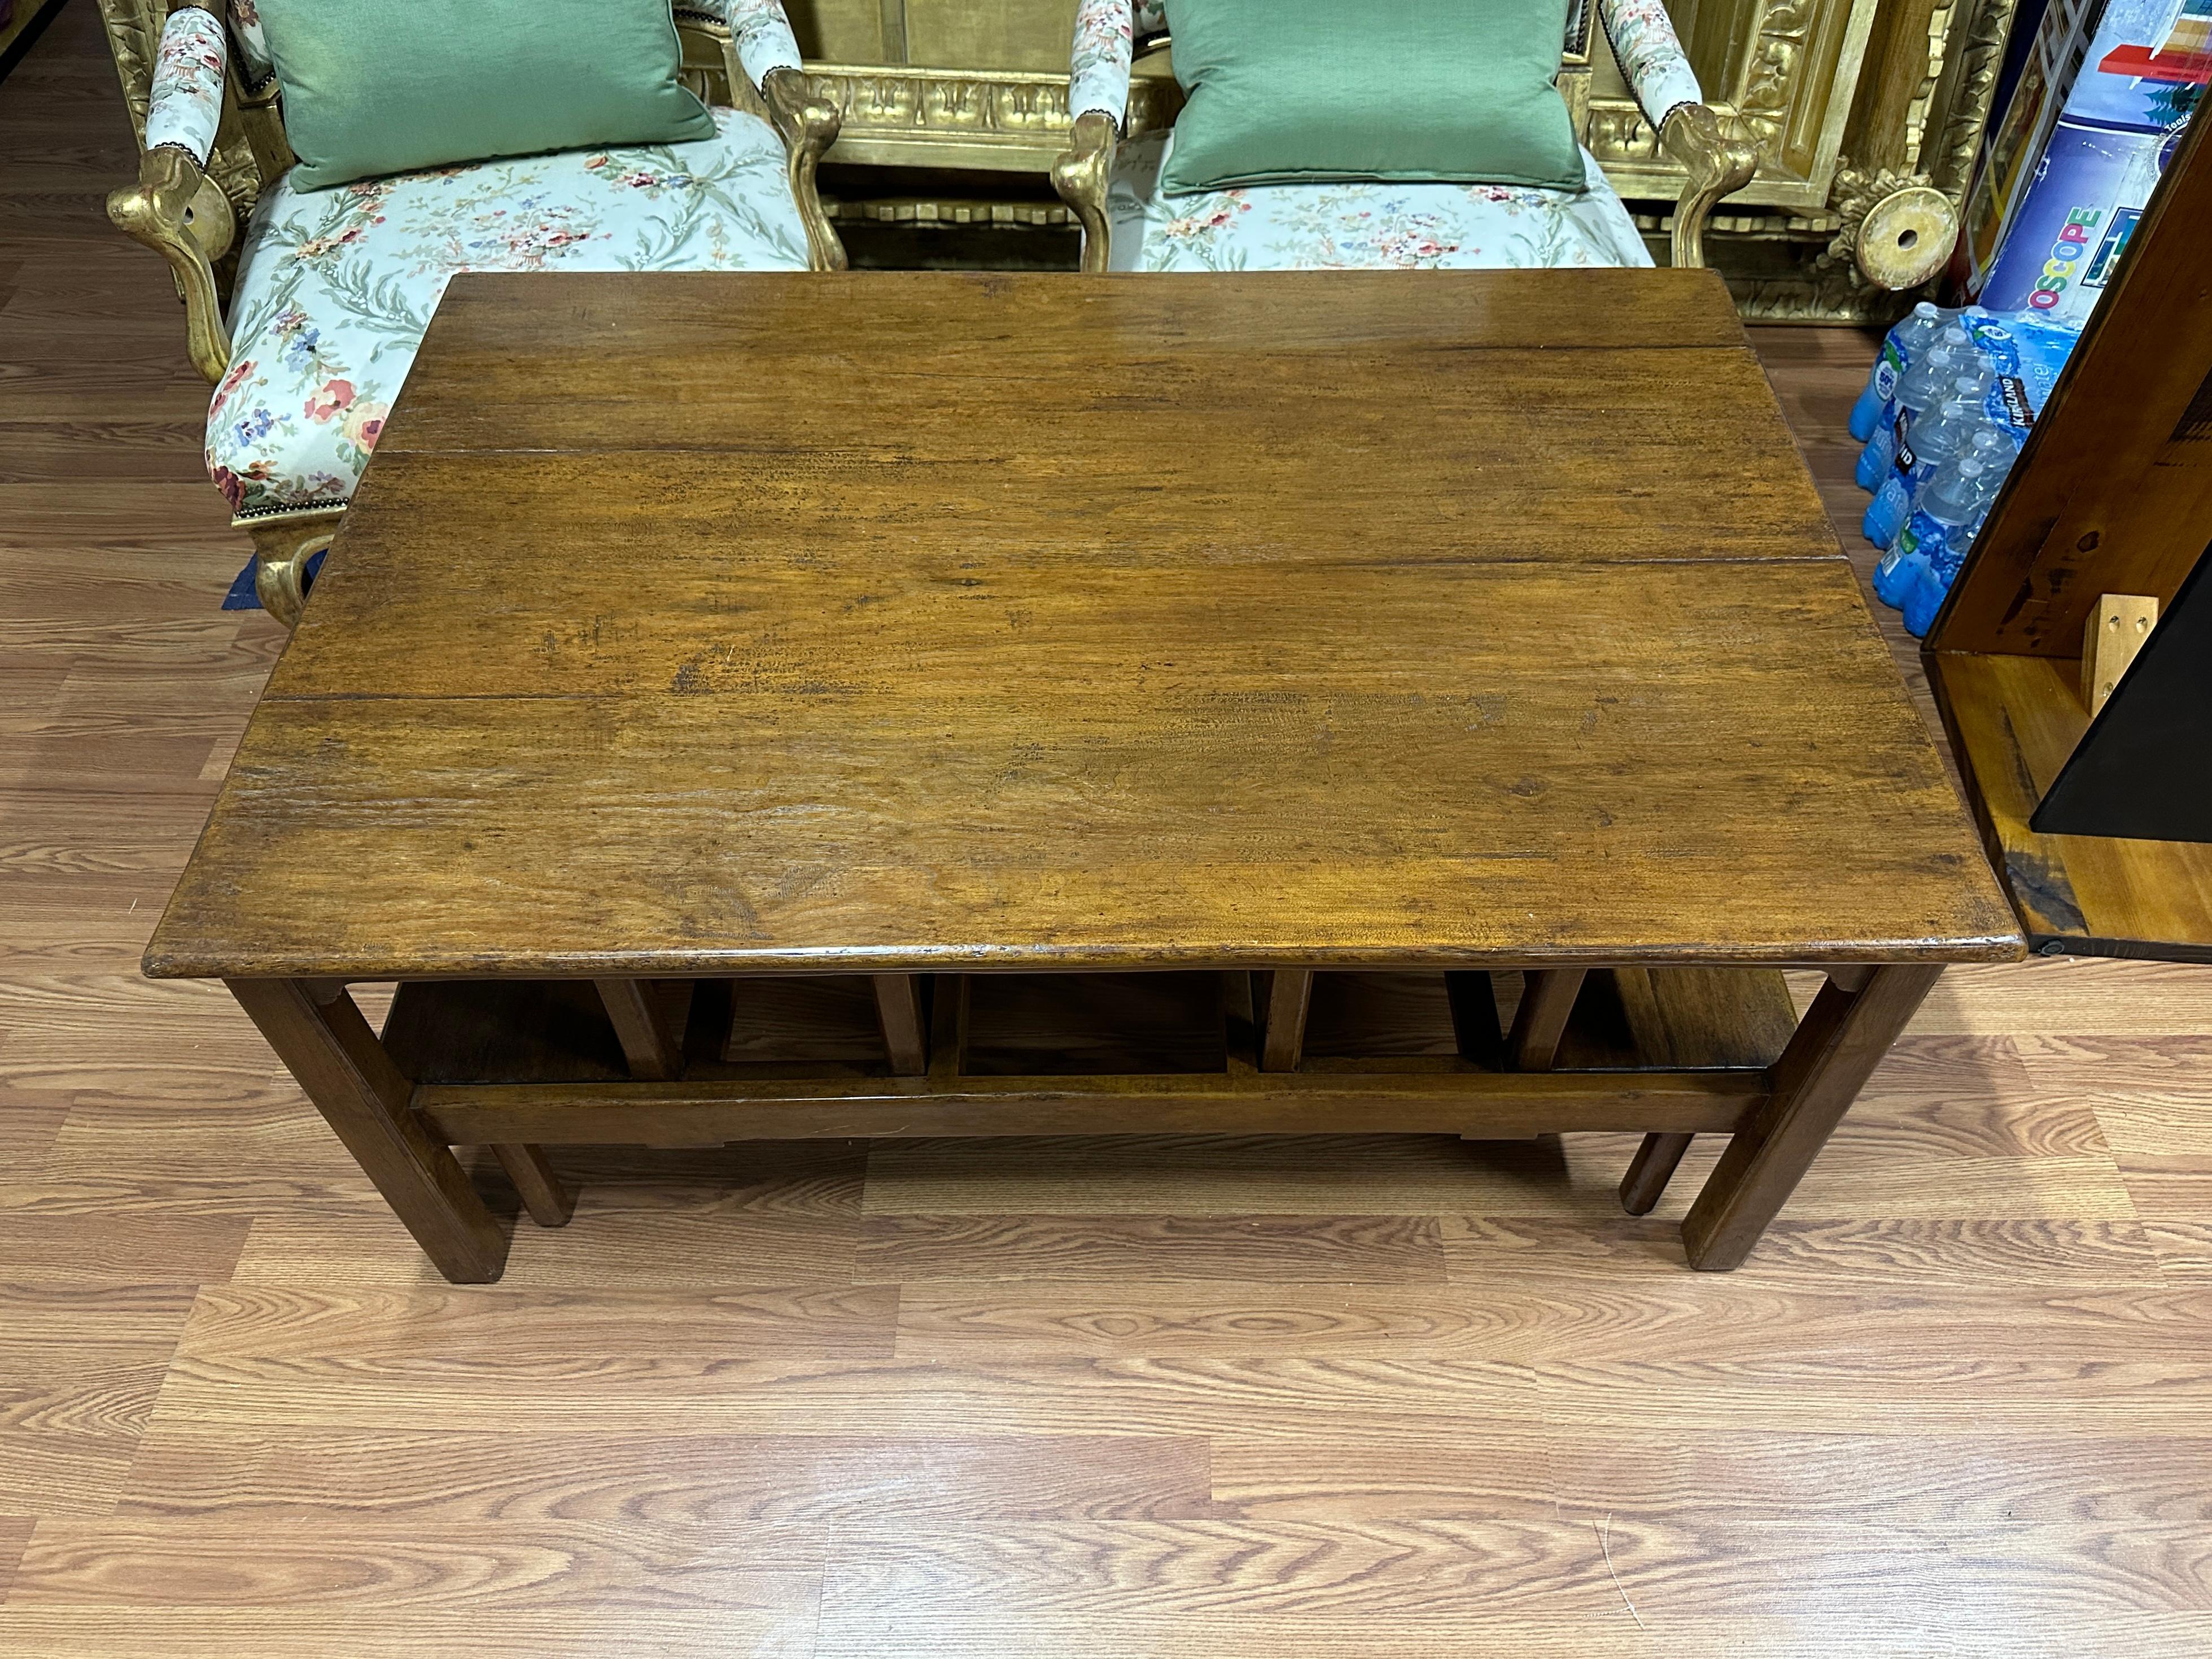 Beautiful walnut Rose Tarlow Windsor coffee cocktail table. We just acquired it out of a magnificent Palm Springs estate along with some beautiful custom pieces and Michael Taylor furniture. The ends slide out and in for additional room. An elegant